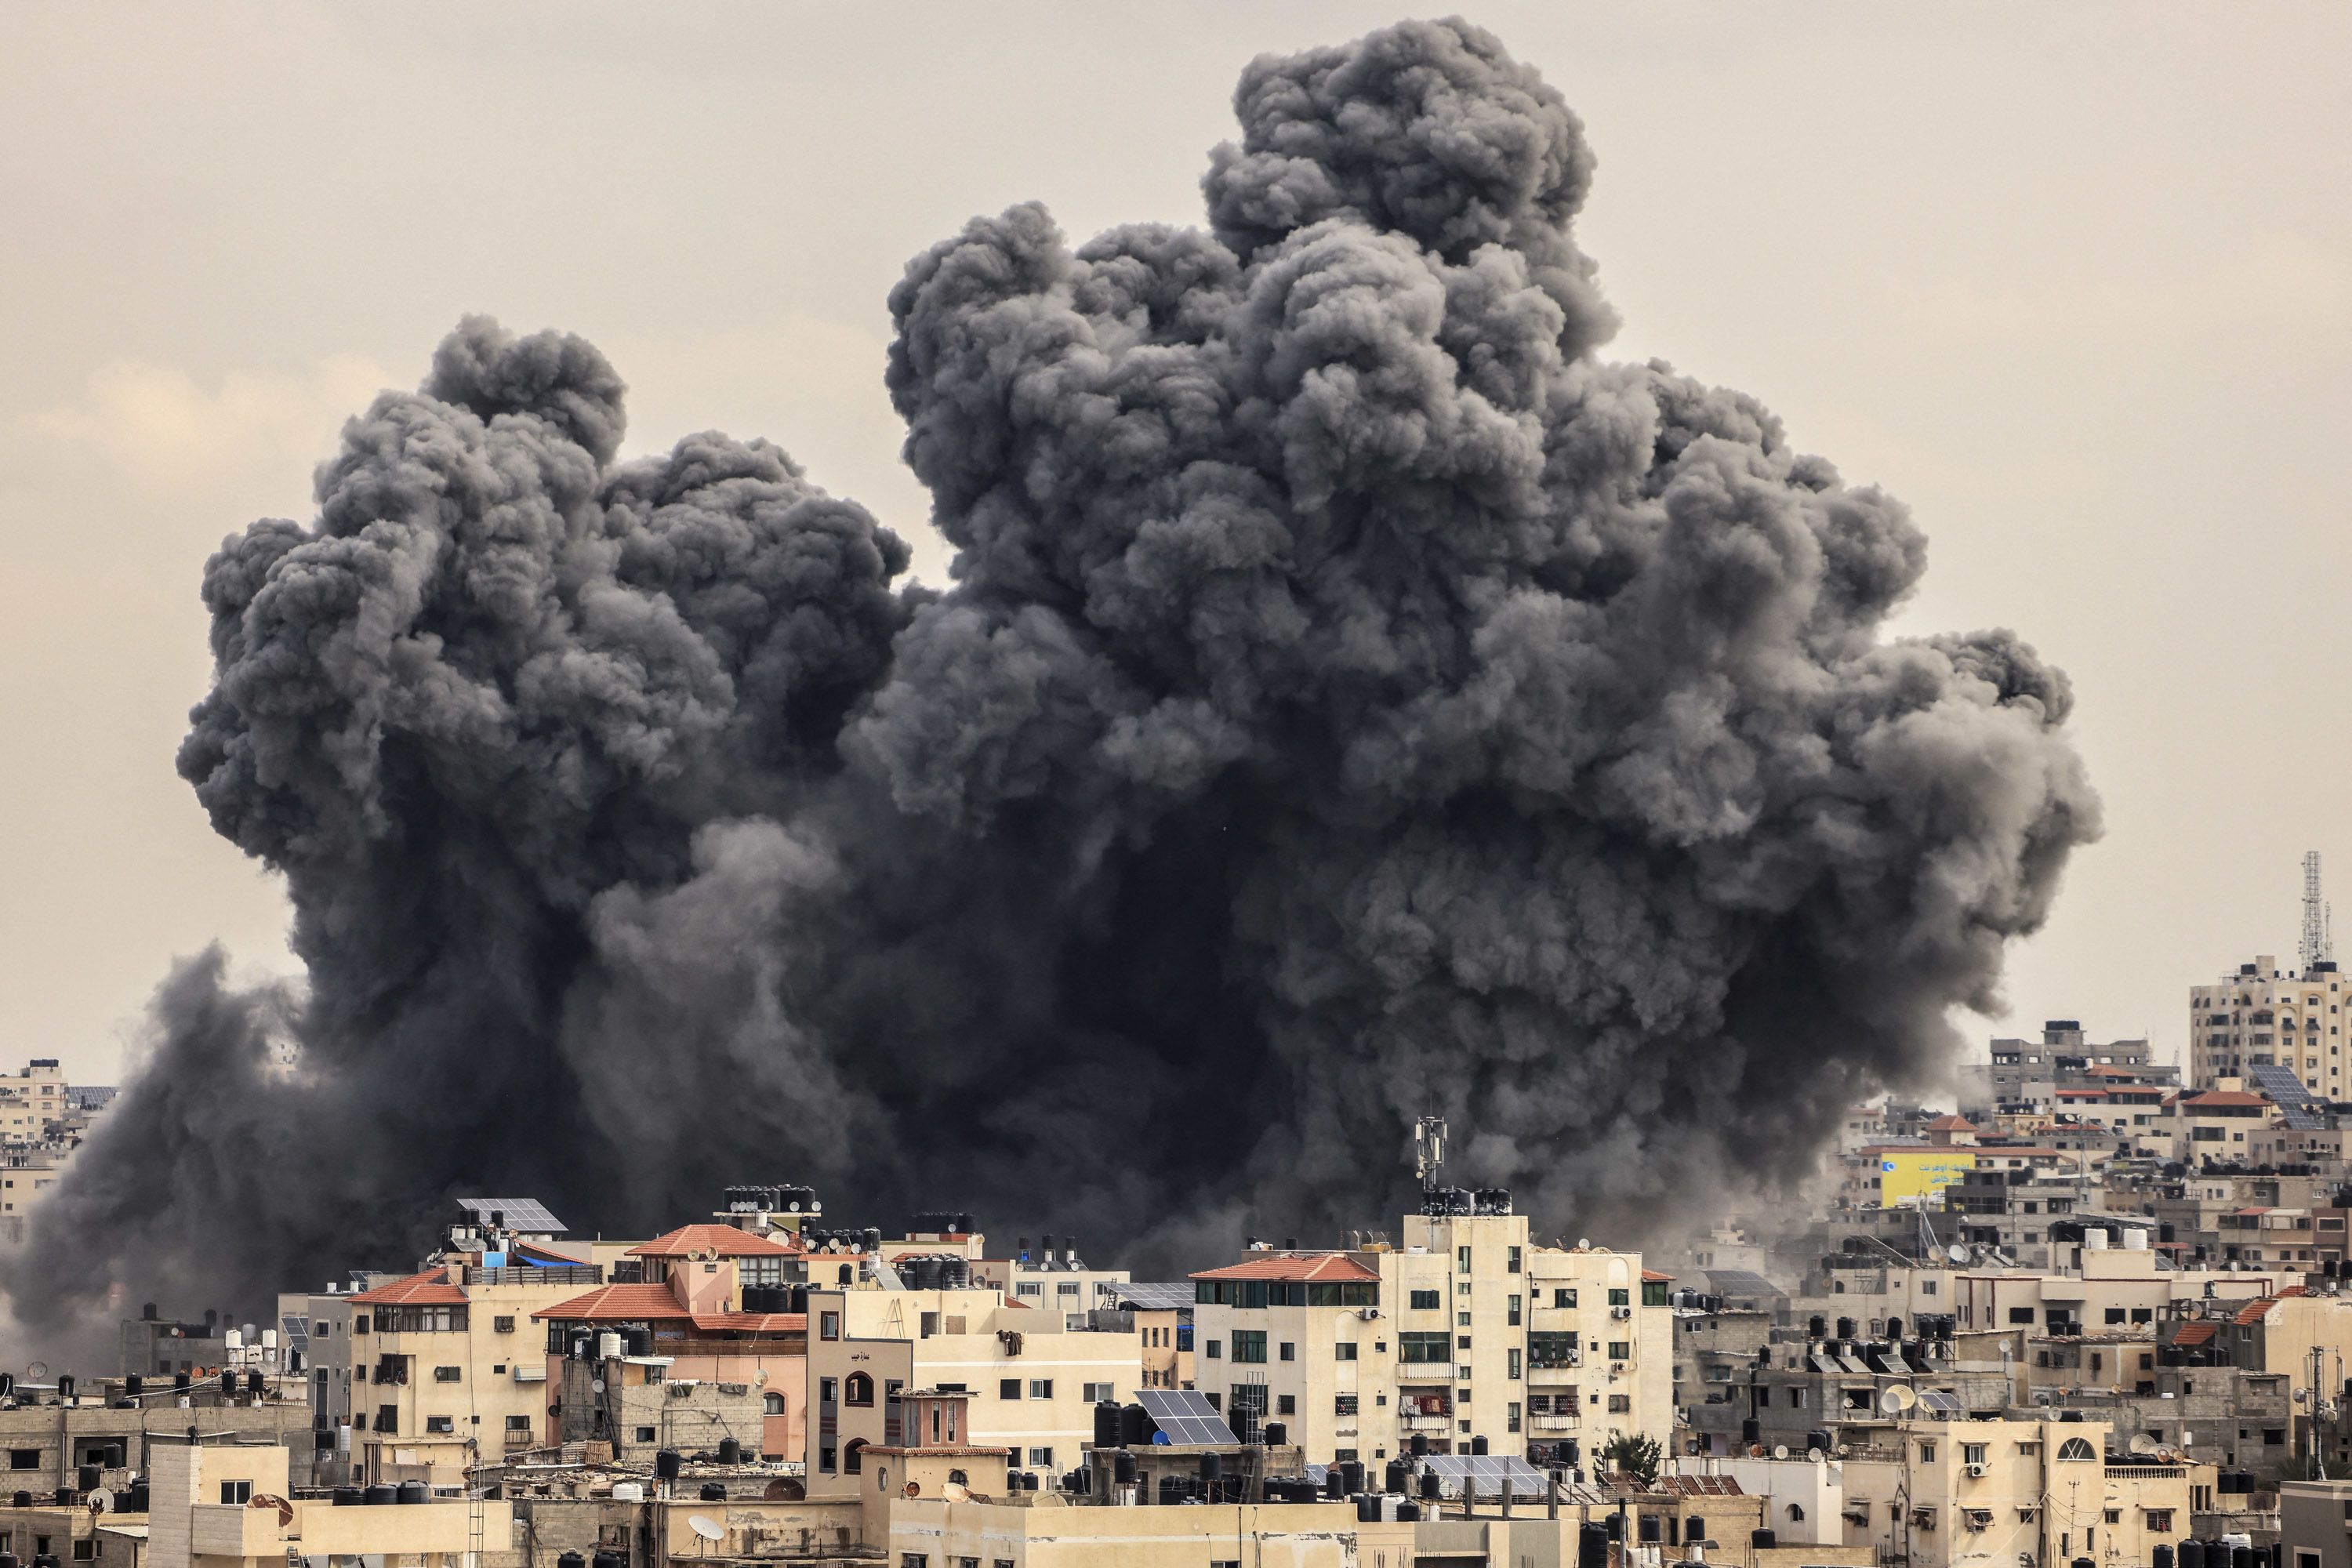 A plume of smoke rises in the sky over Gaza City during an Israeli airstrike on October 9.